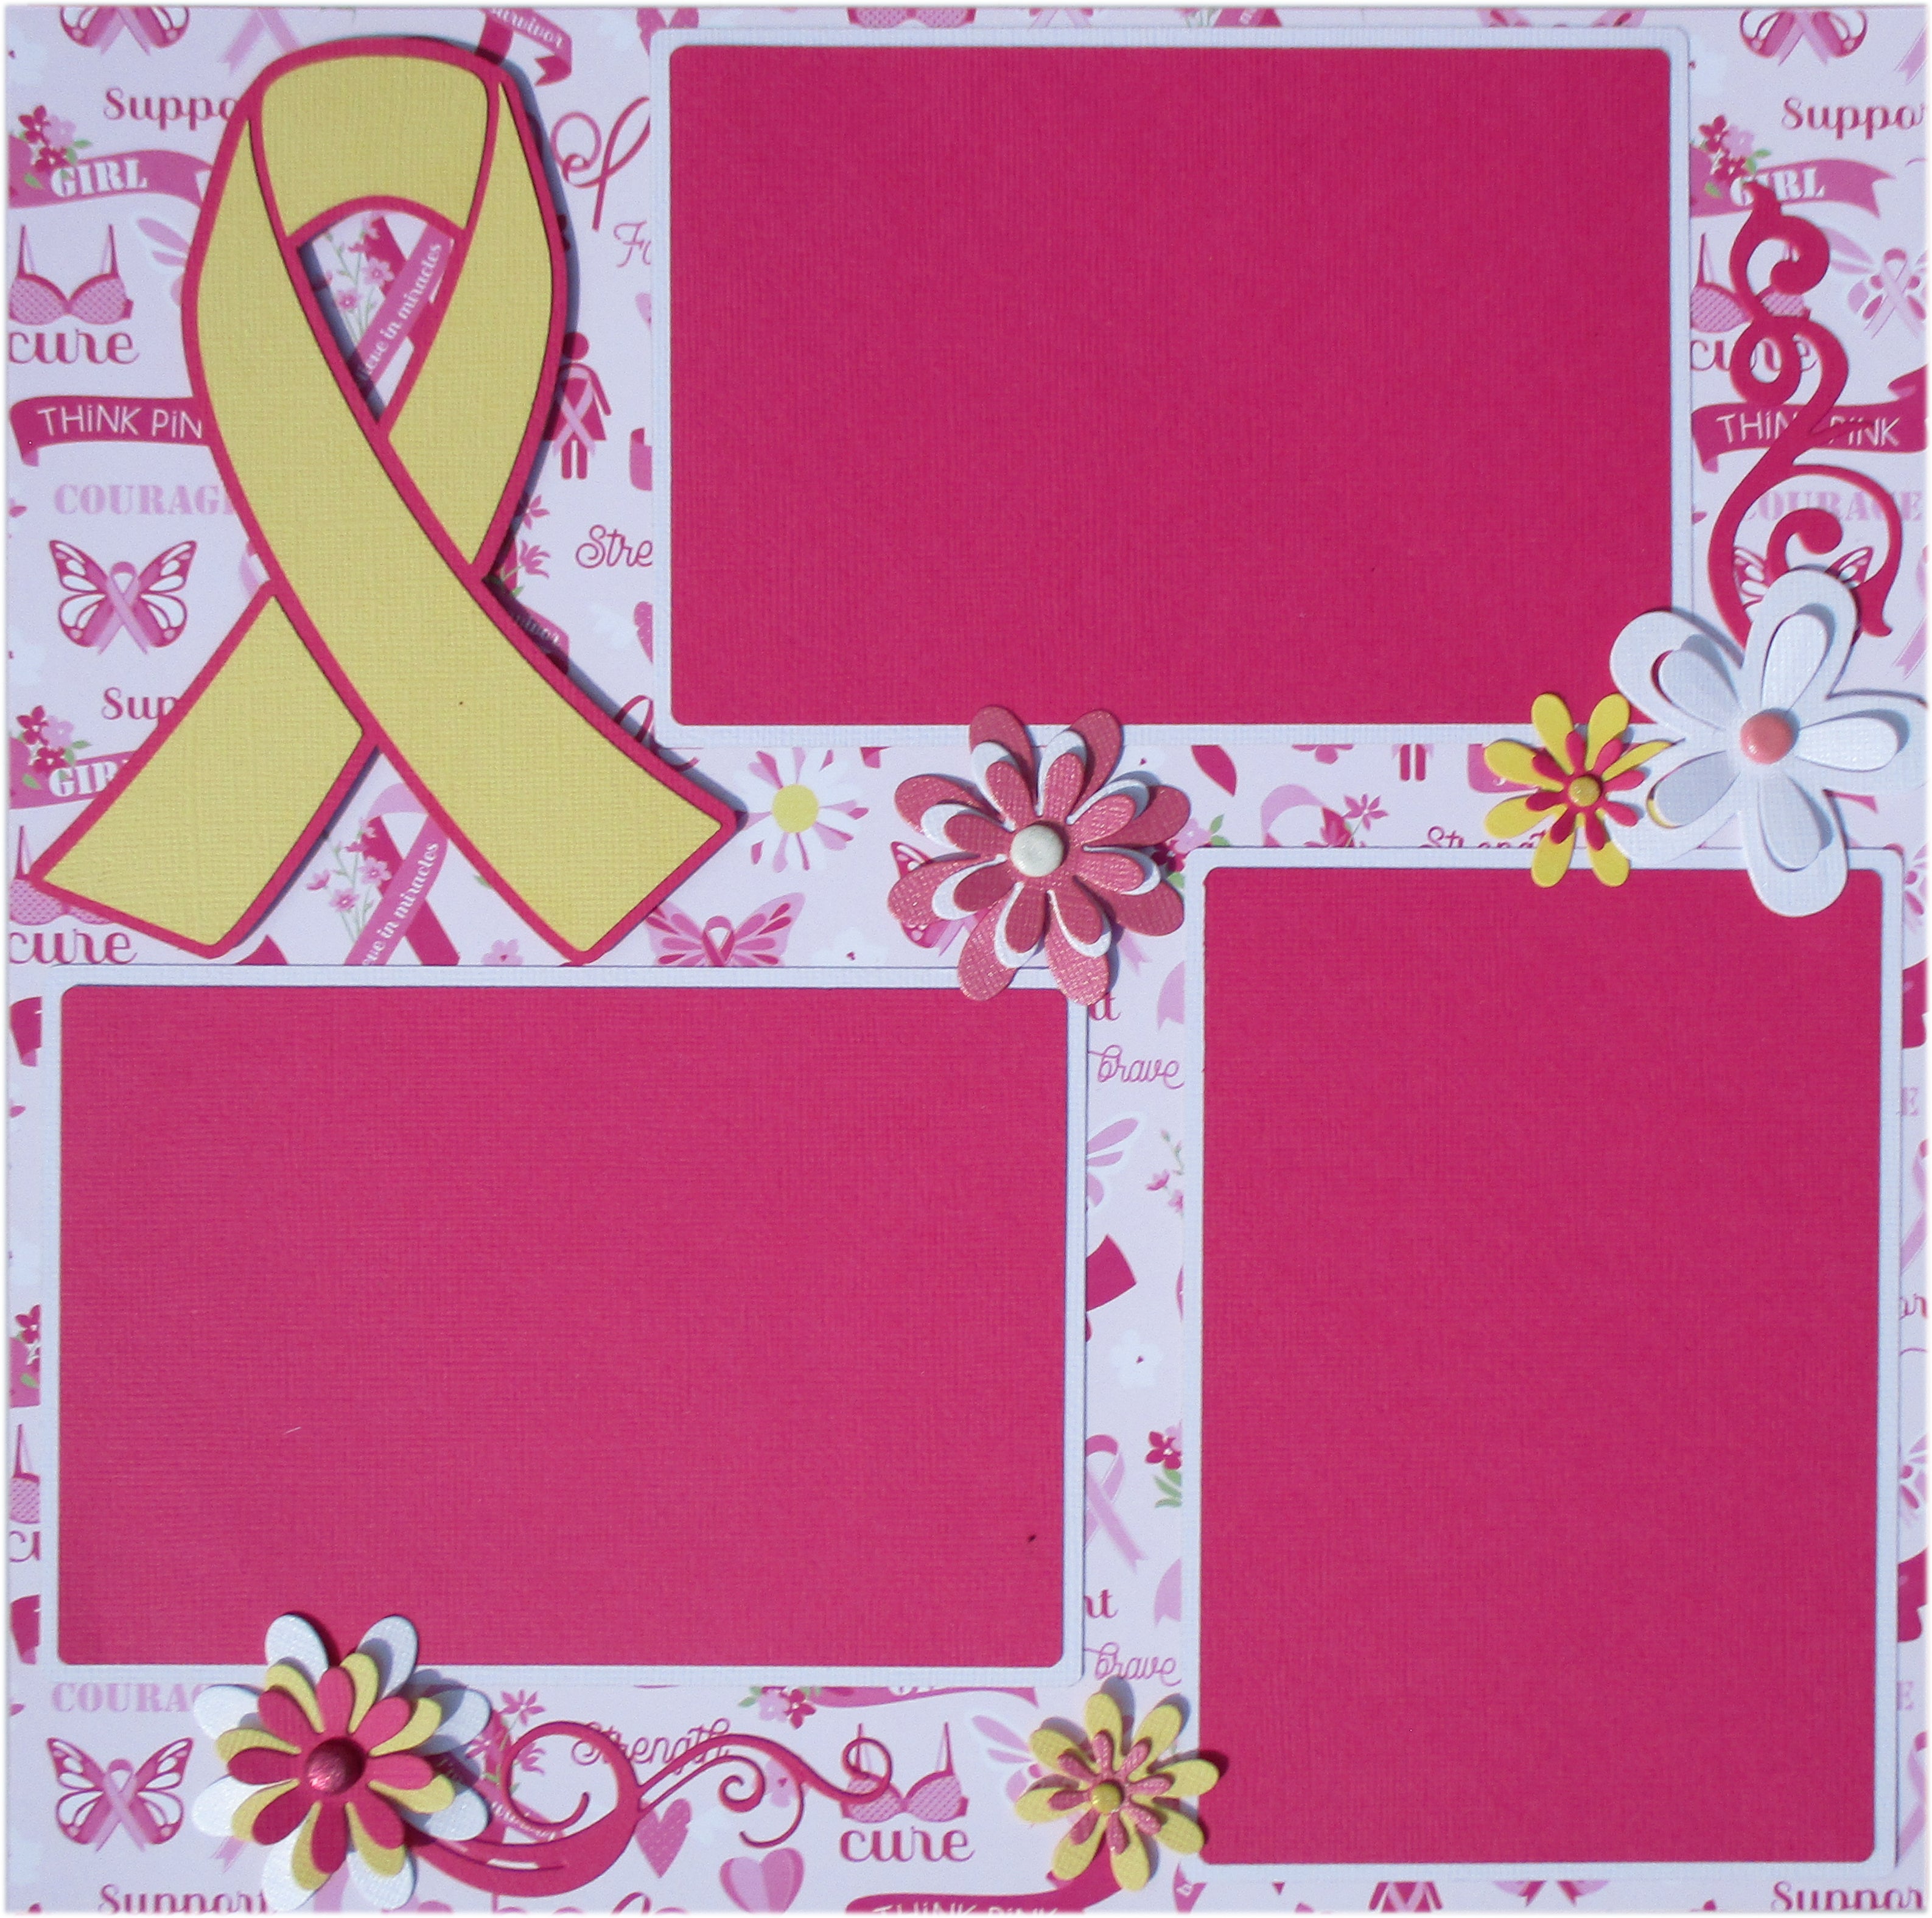 Operation: Save 2nd Base Breast Cancer Awareness 2- 12 x 12 Page Fully-Assembled & Hand-Embellished 3D Scrapbook Premades by SSC Designs